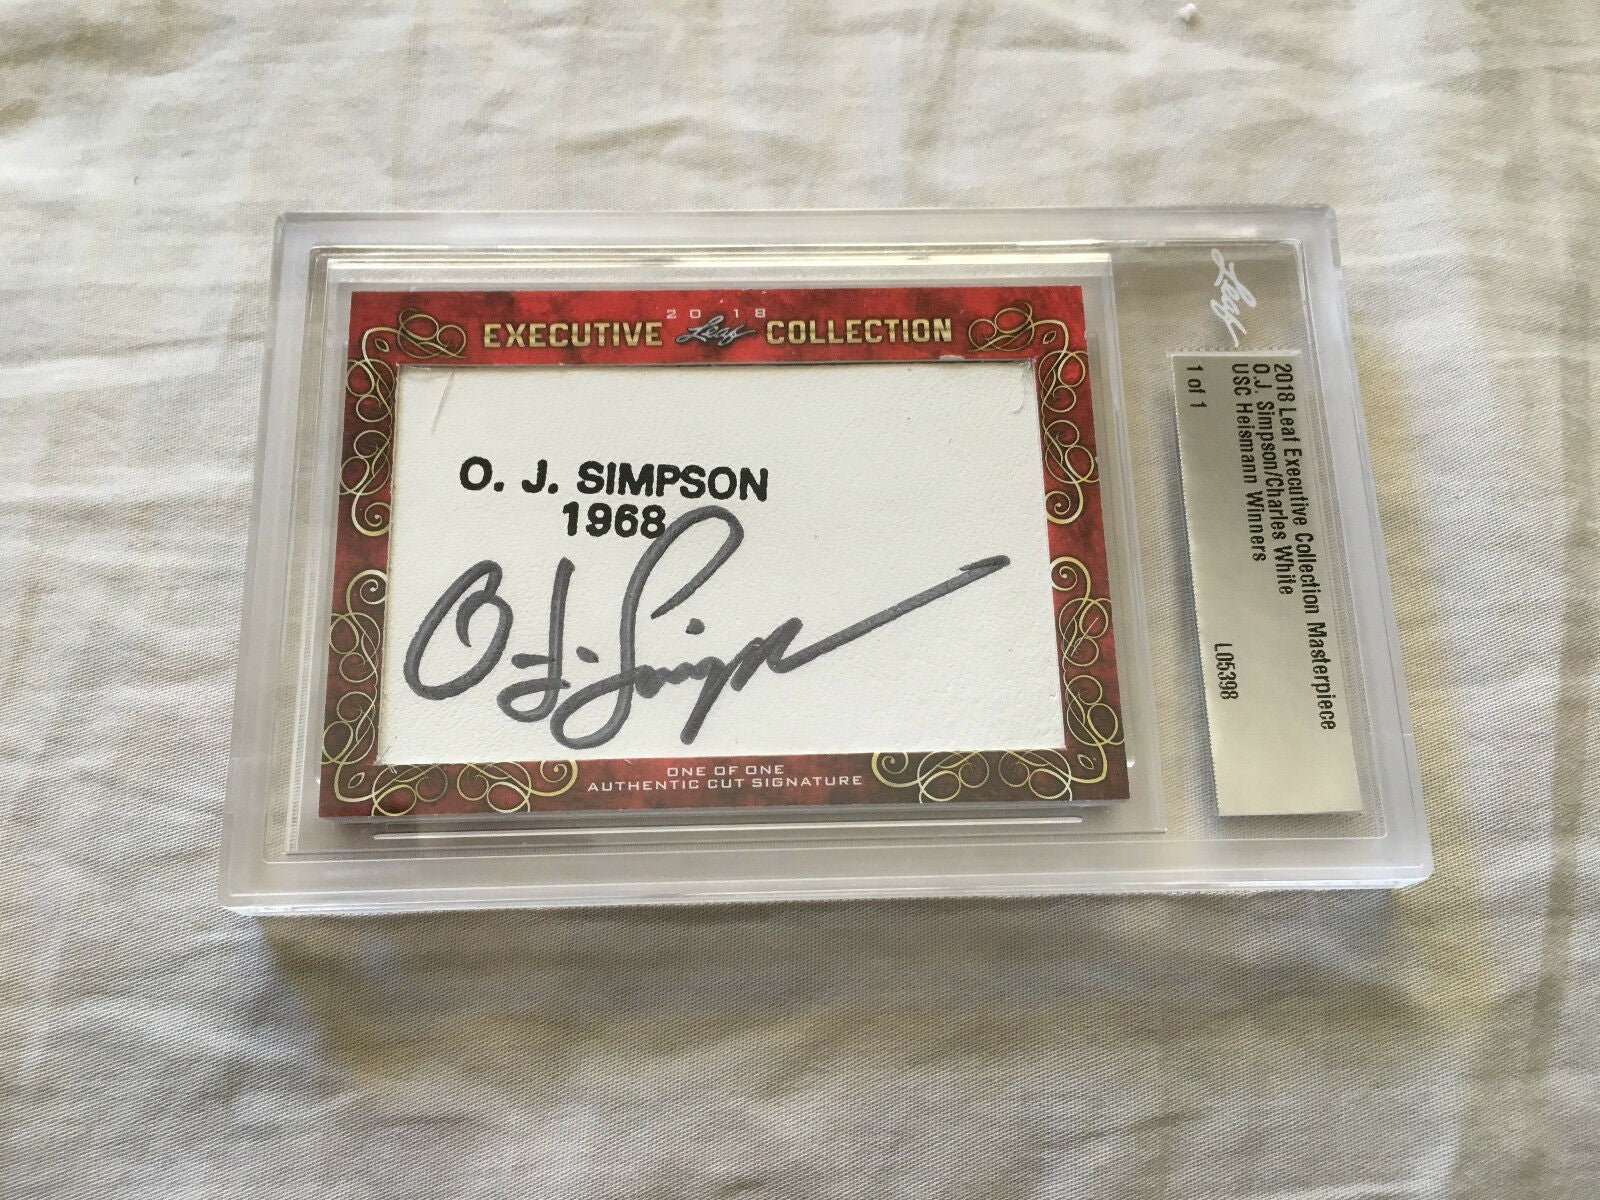 O.J. Simpson and Charles White 2018 Leaf Masterpiece Cut Signature certified autograph card 1/1 JSA